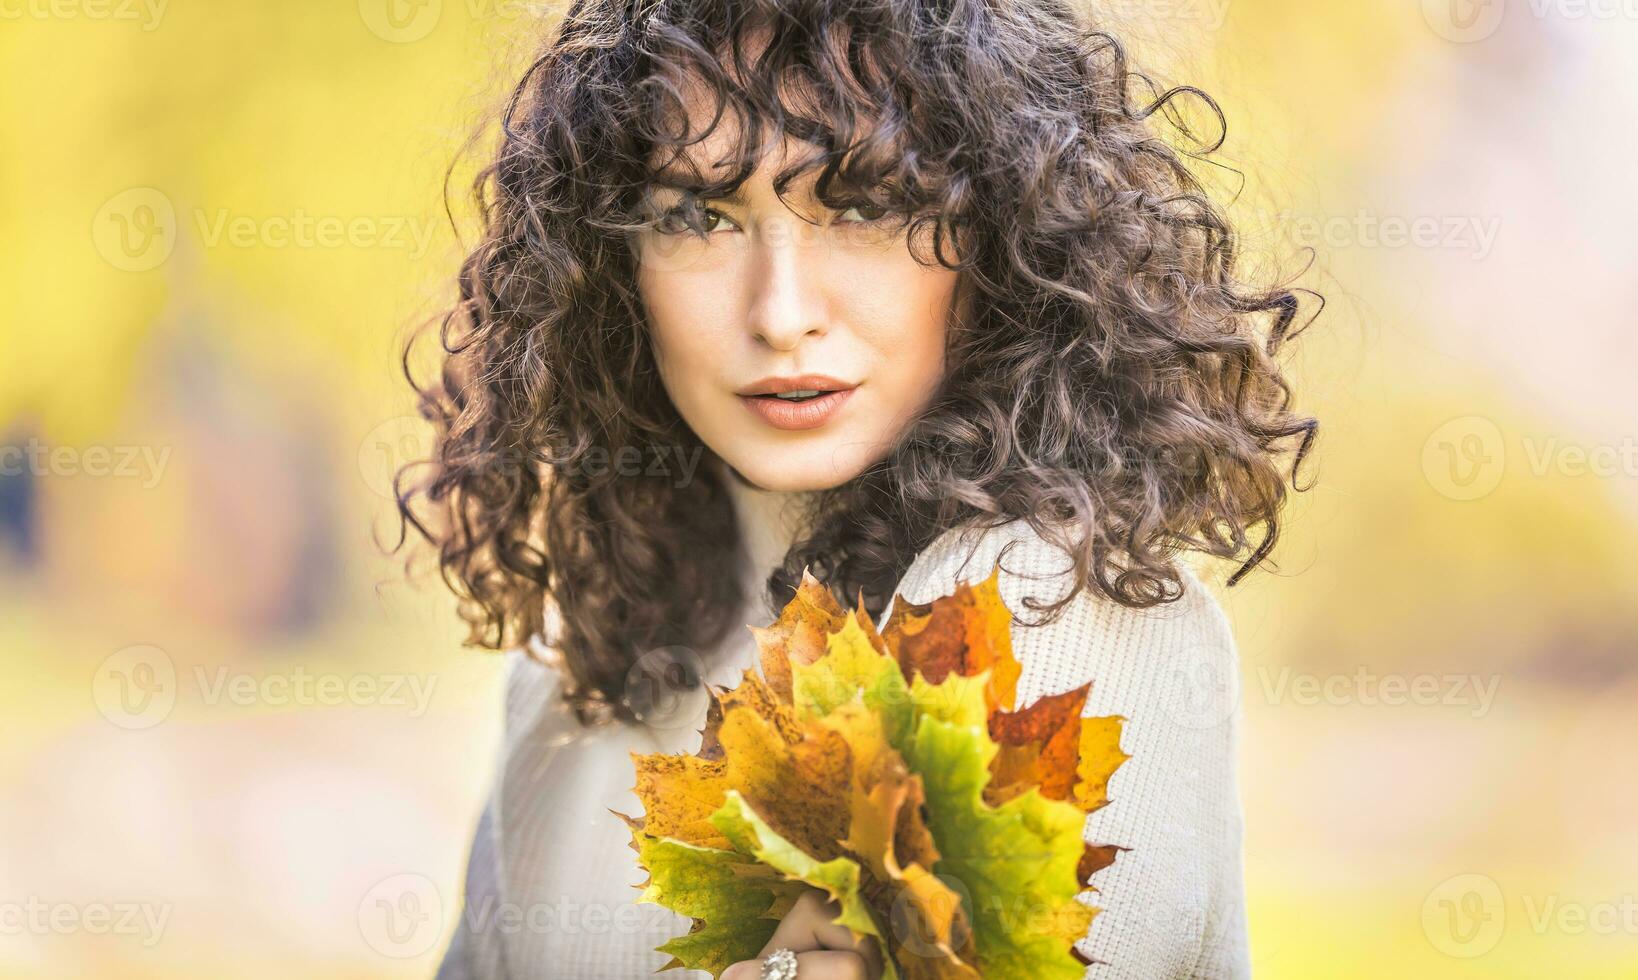 Autumn portrait of young woman with curly hair and bouquet of maple leaves photo